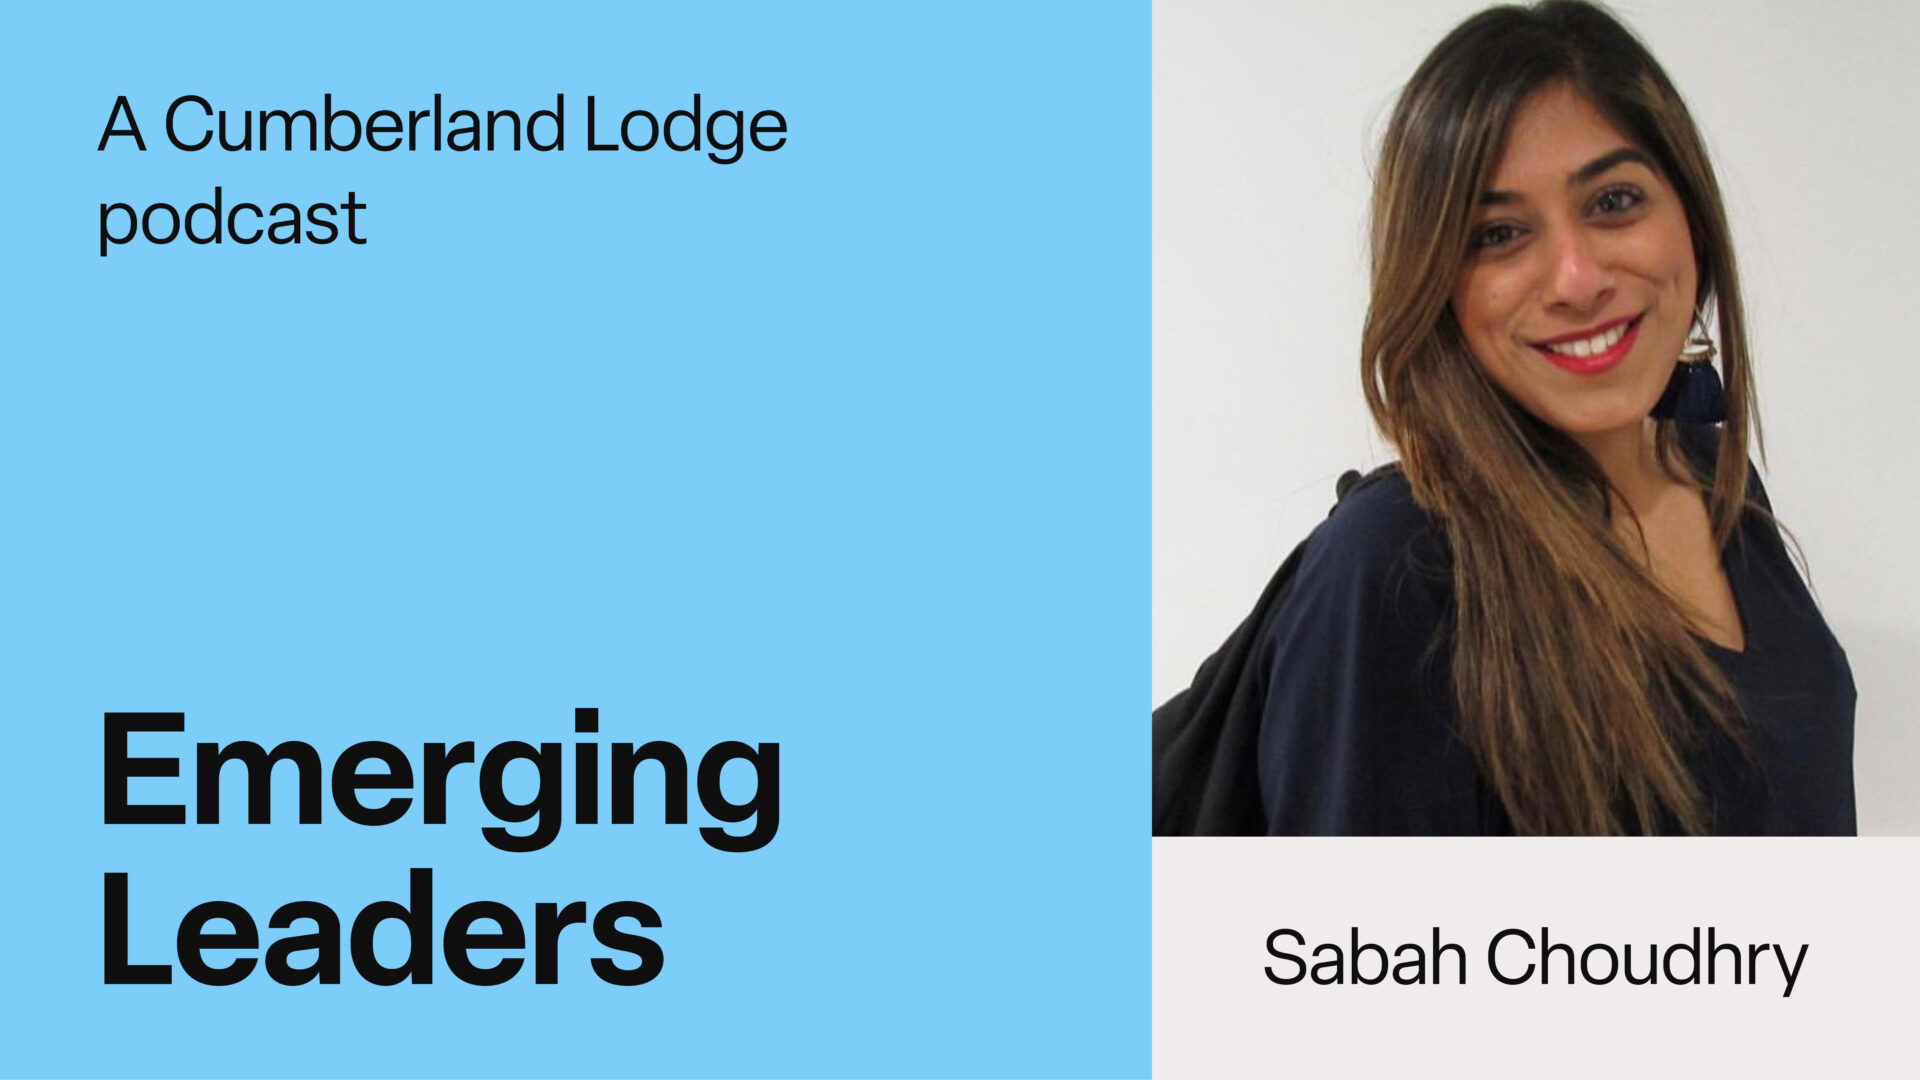 TEXT: A Cumberland Lodge Podcast. Emerging Leaders: Sabah Choudhry - Authenticity in journalism